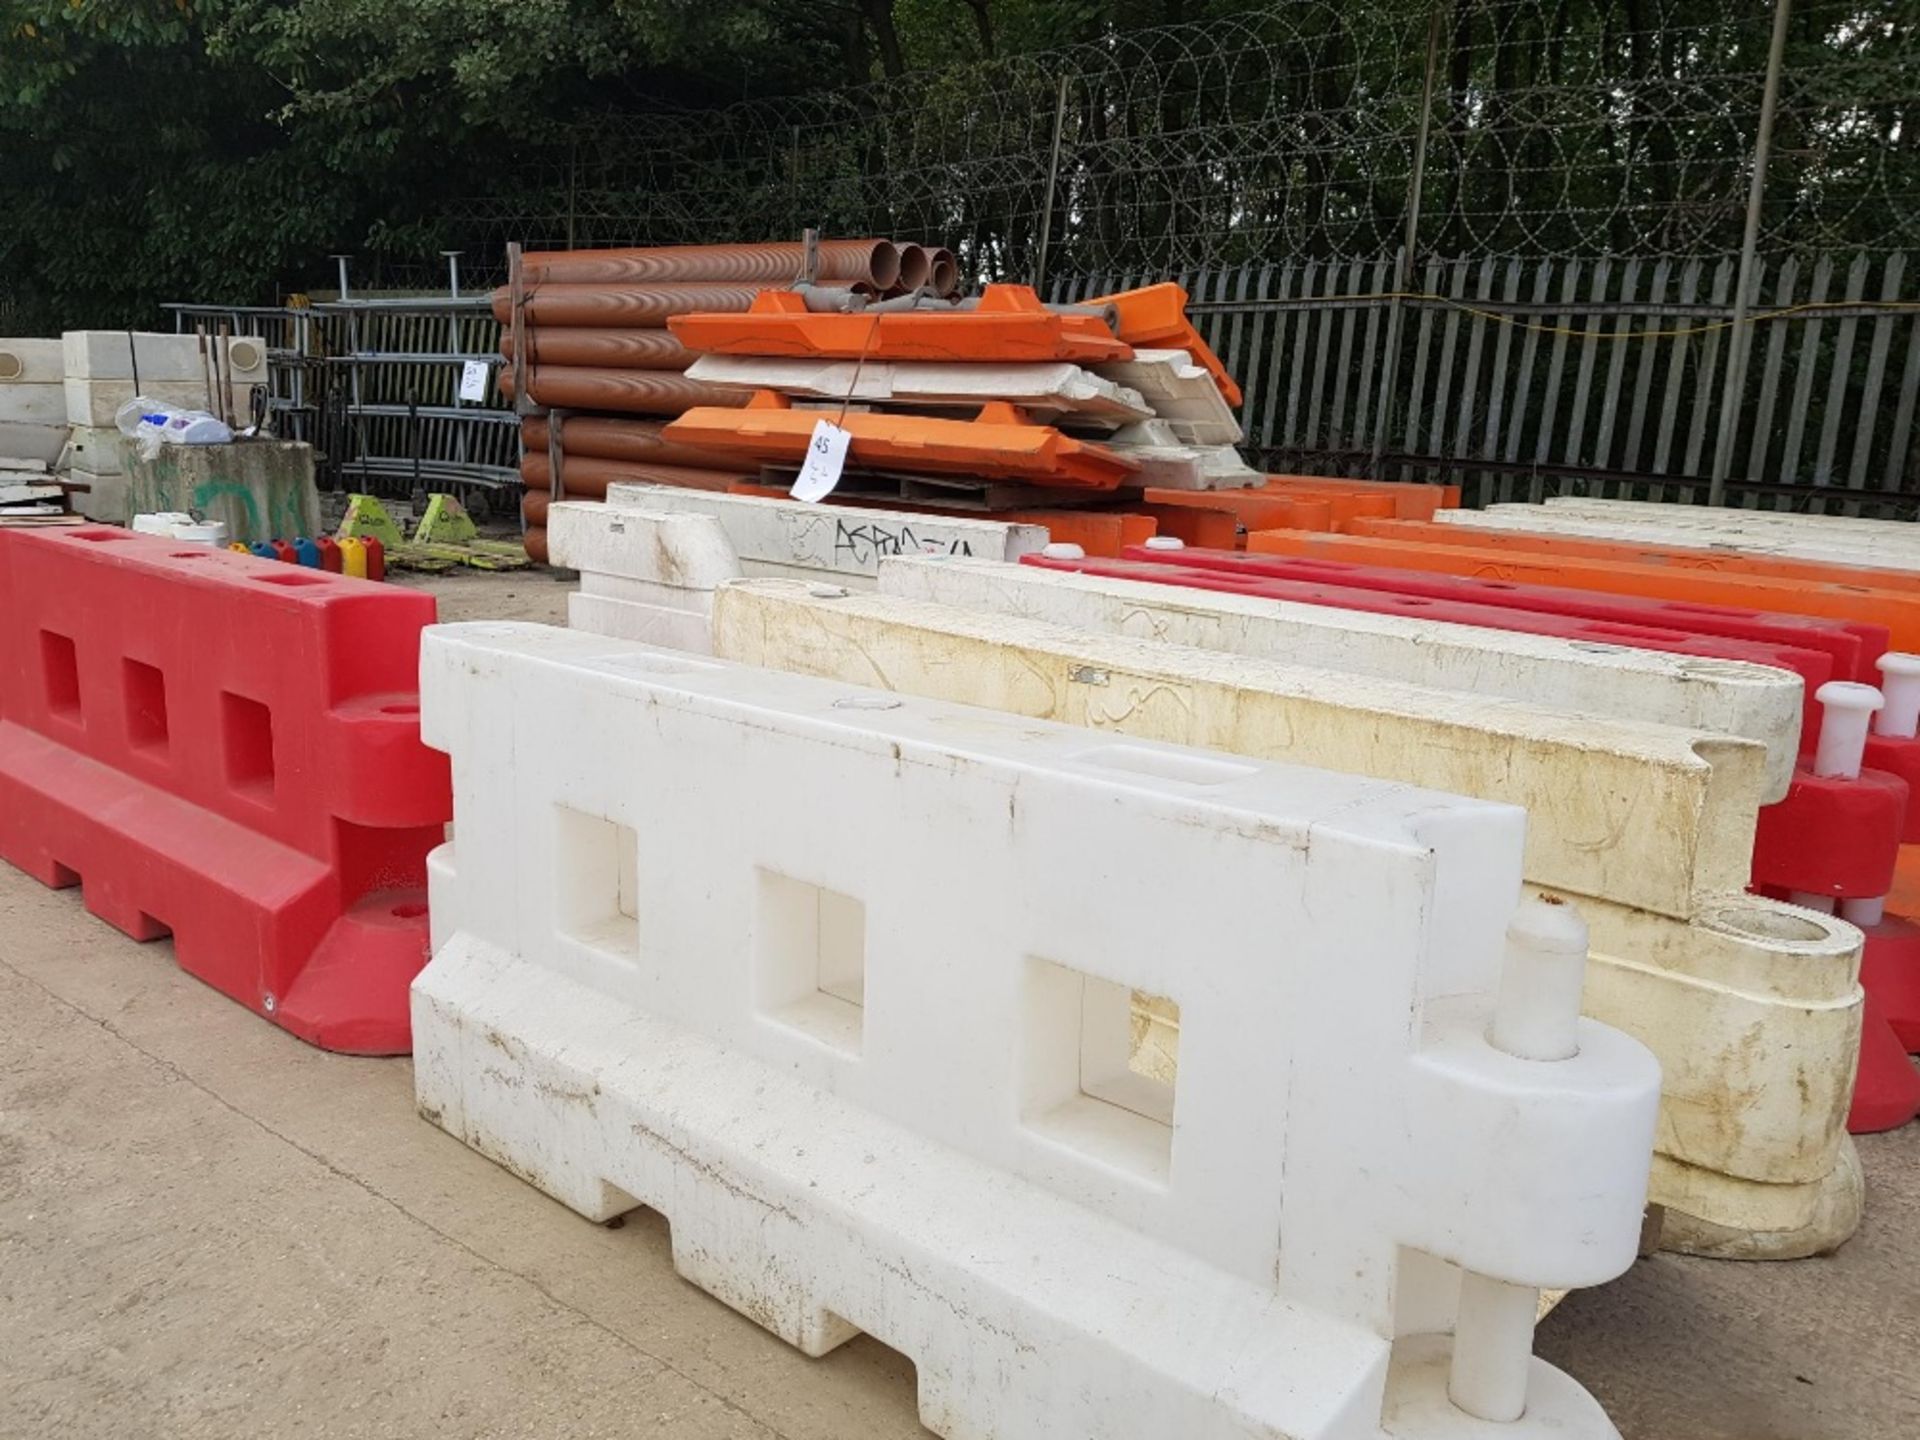 Orange / red & White Plastic Vehicle and pedestrian Barriers - 16No 2.0m long LOT LOCATION: TN14